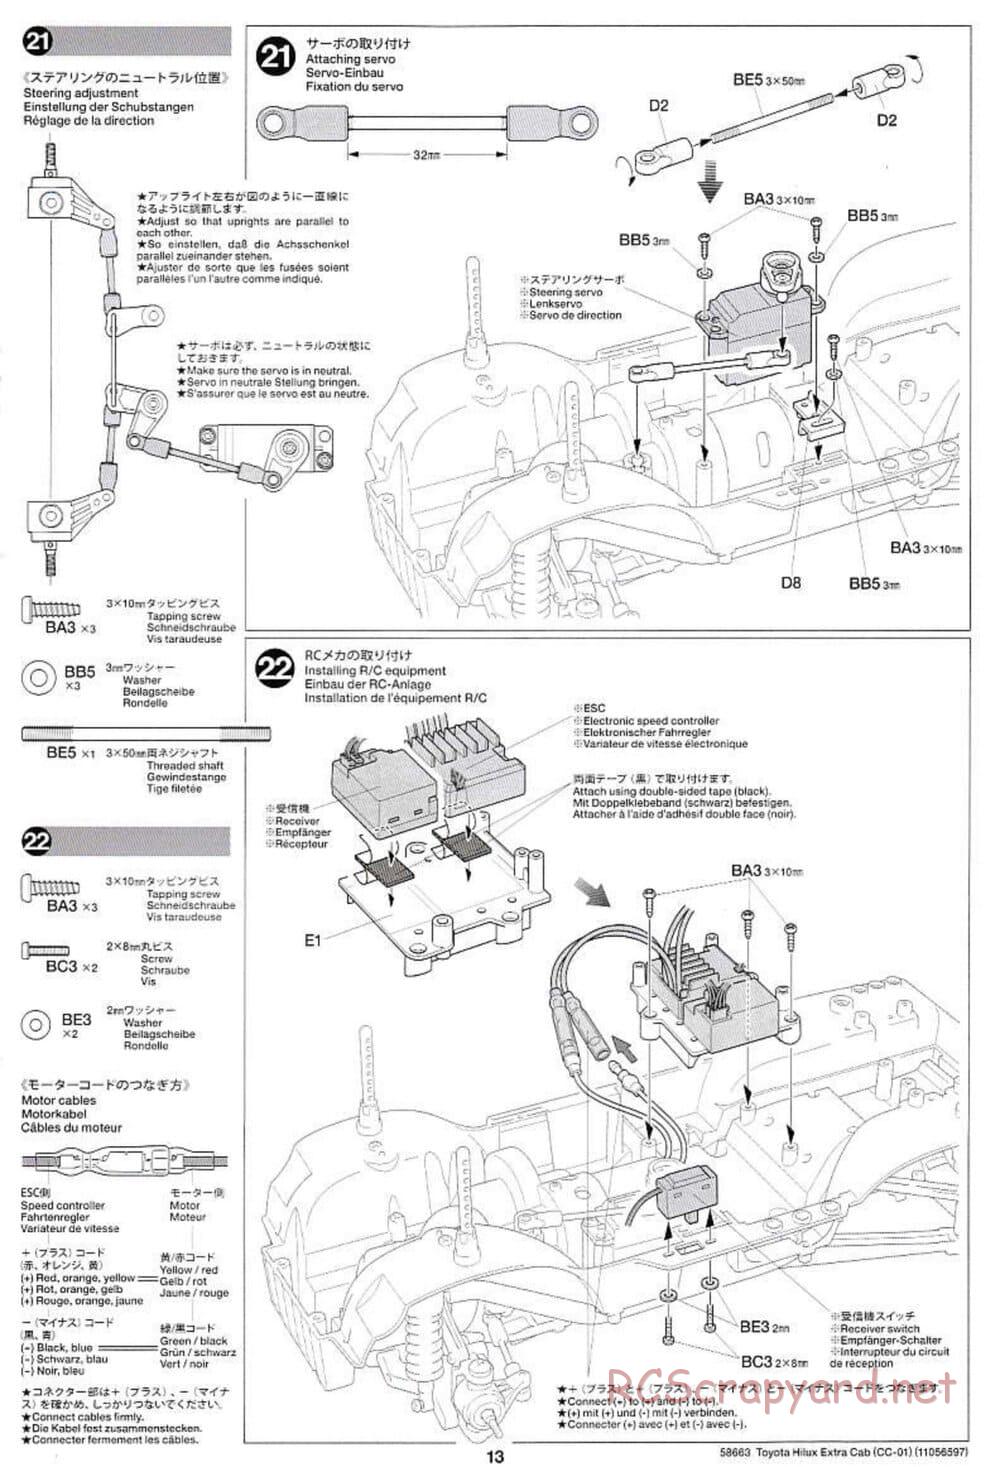 Tamiya - Toyota Hilux Extra Cab - CC-01 Chassis - Manual - Page 13